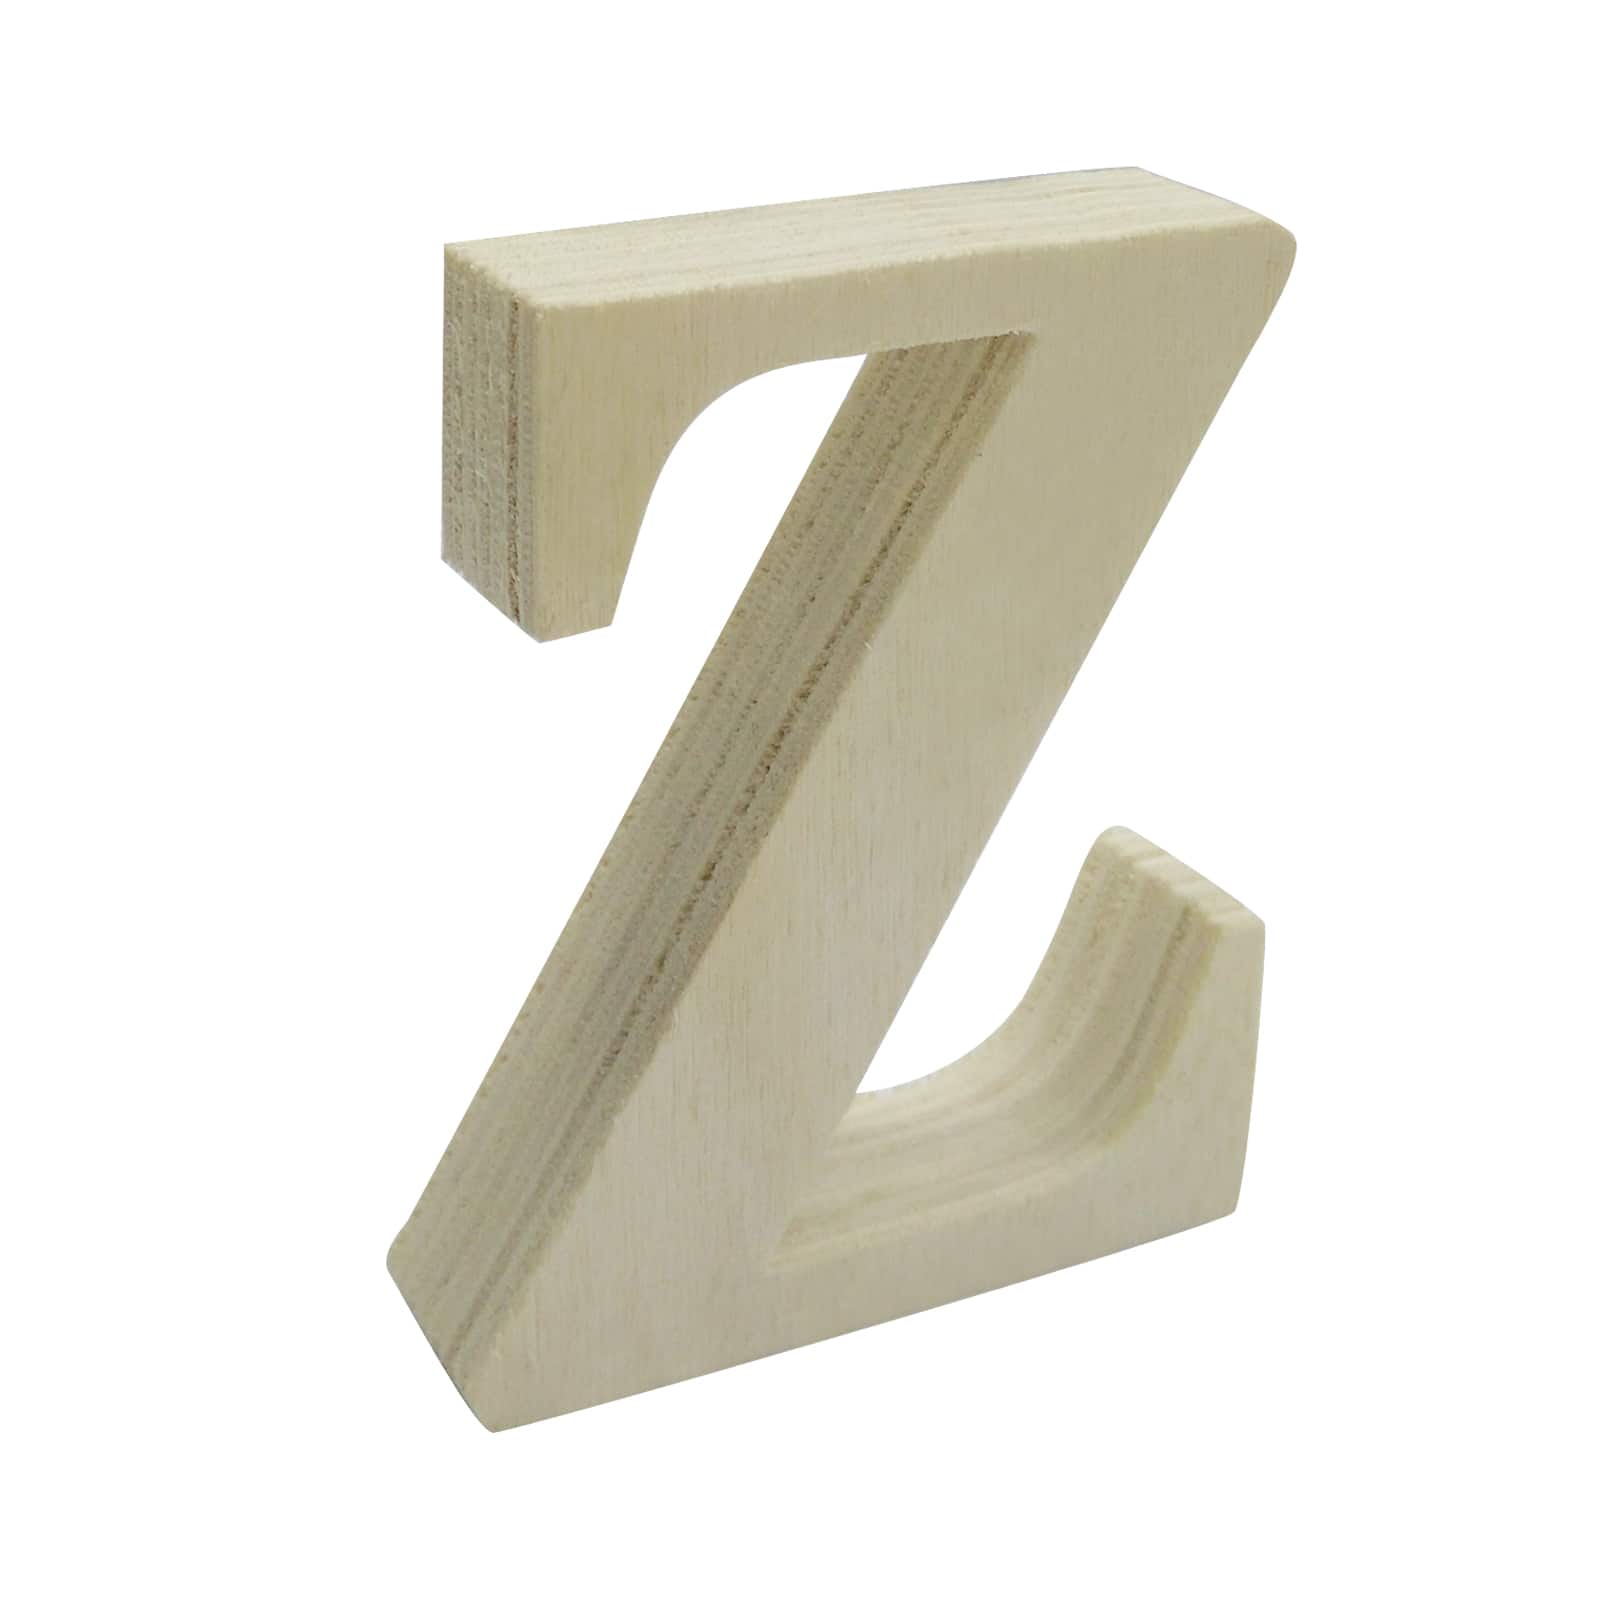 Custom Large Toy 3D Wooden Block Letter Wall Decor DIY -   Wooden block  letters, Letter wall decor, Letter wall decor diy